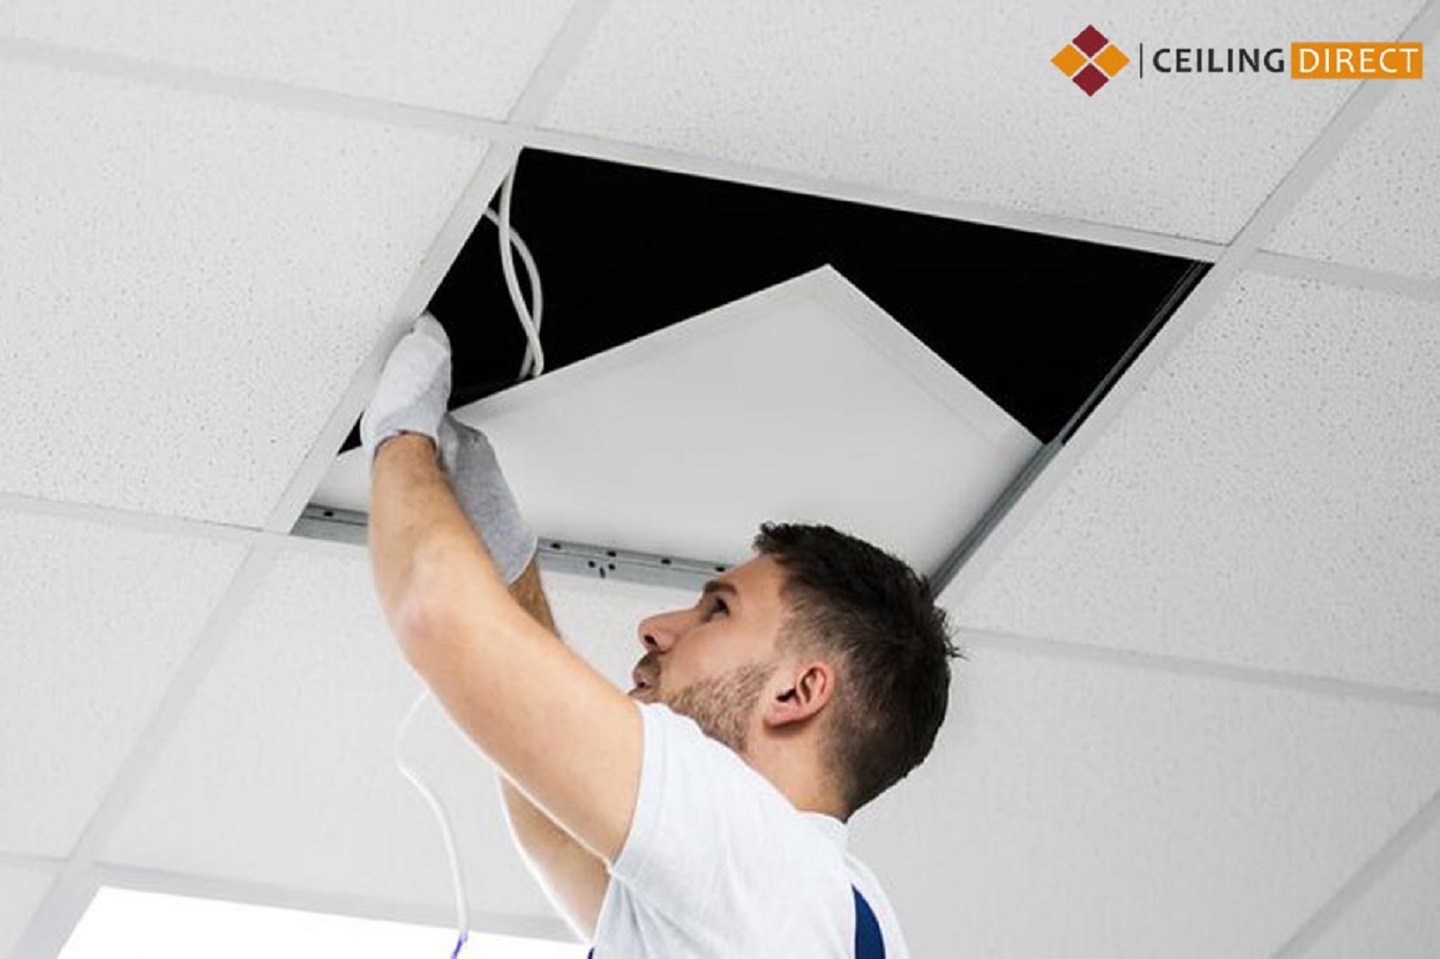 Main image for Ceiling Direct Ltd